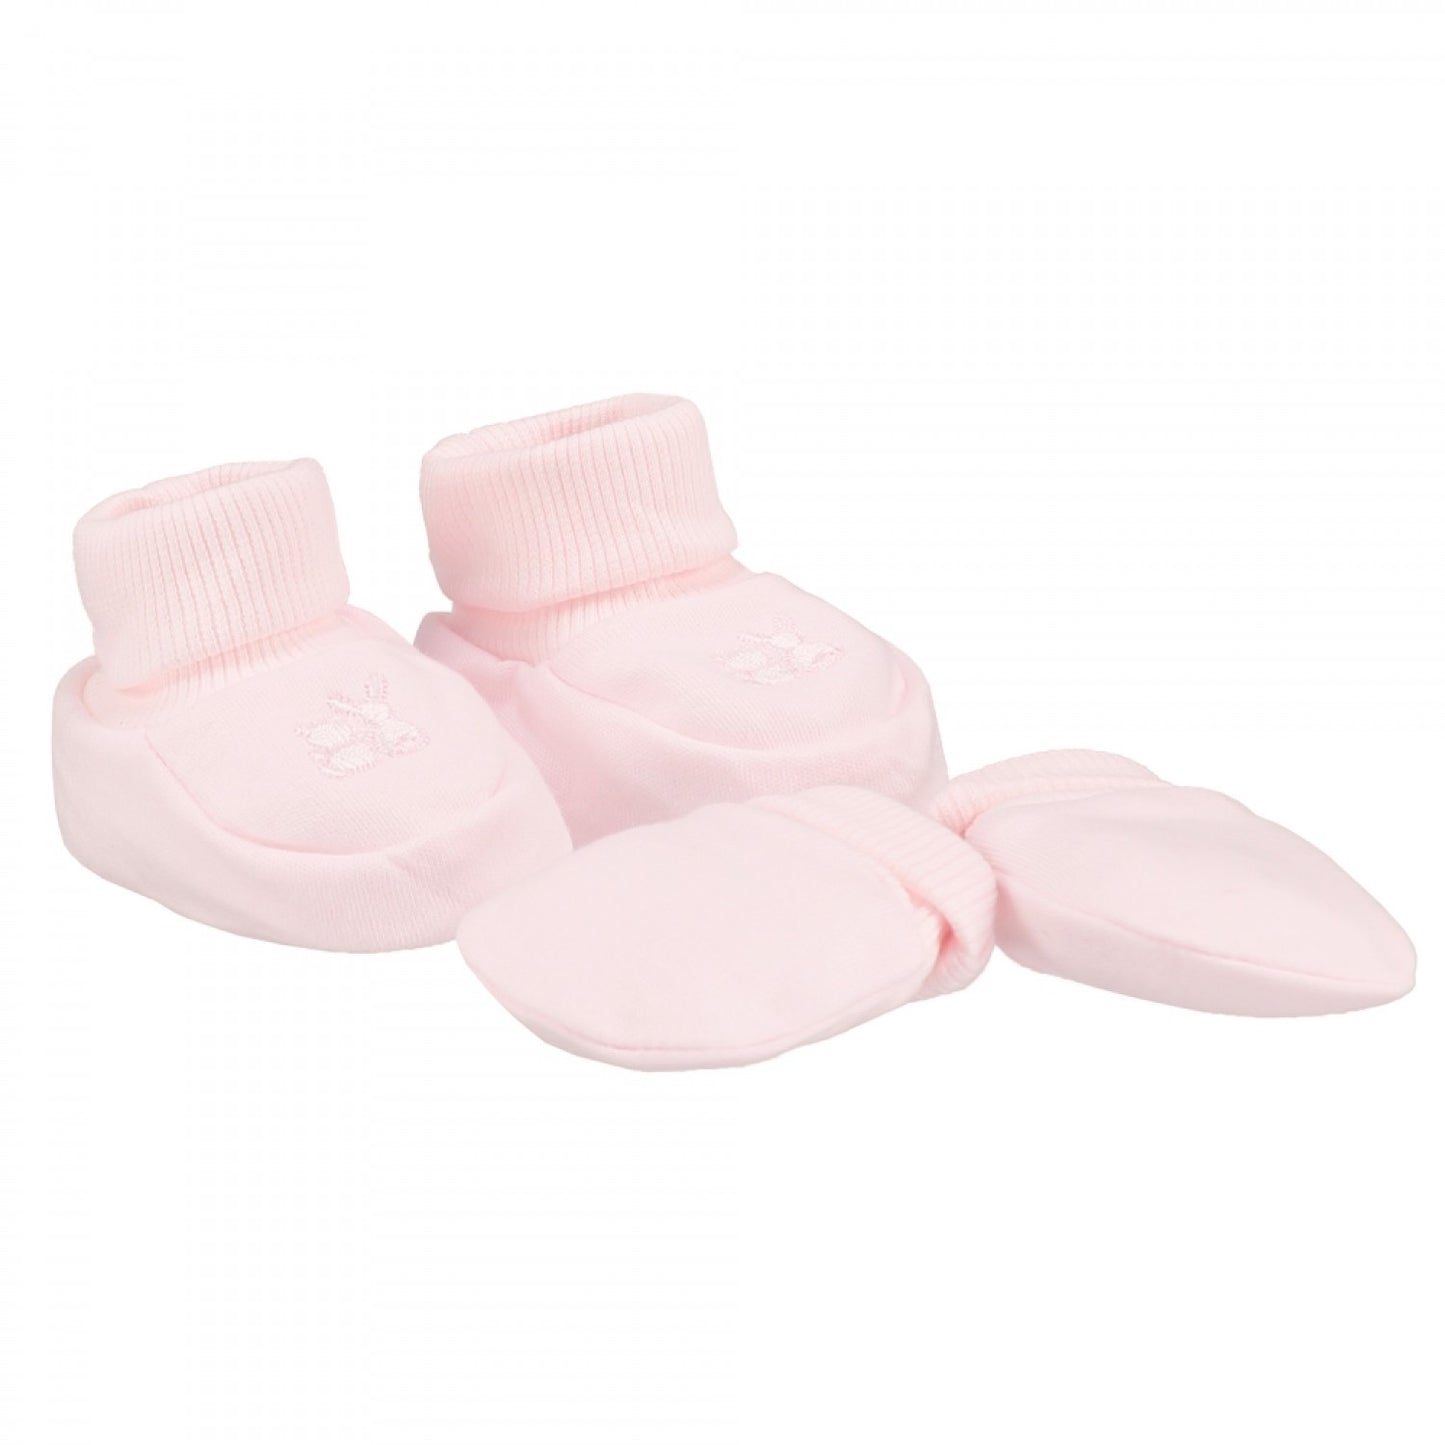 Nox Hat, Bootee and Mitt gift set - Pink